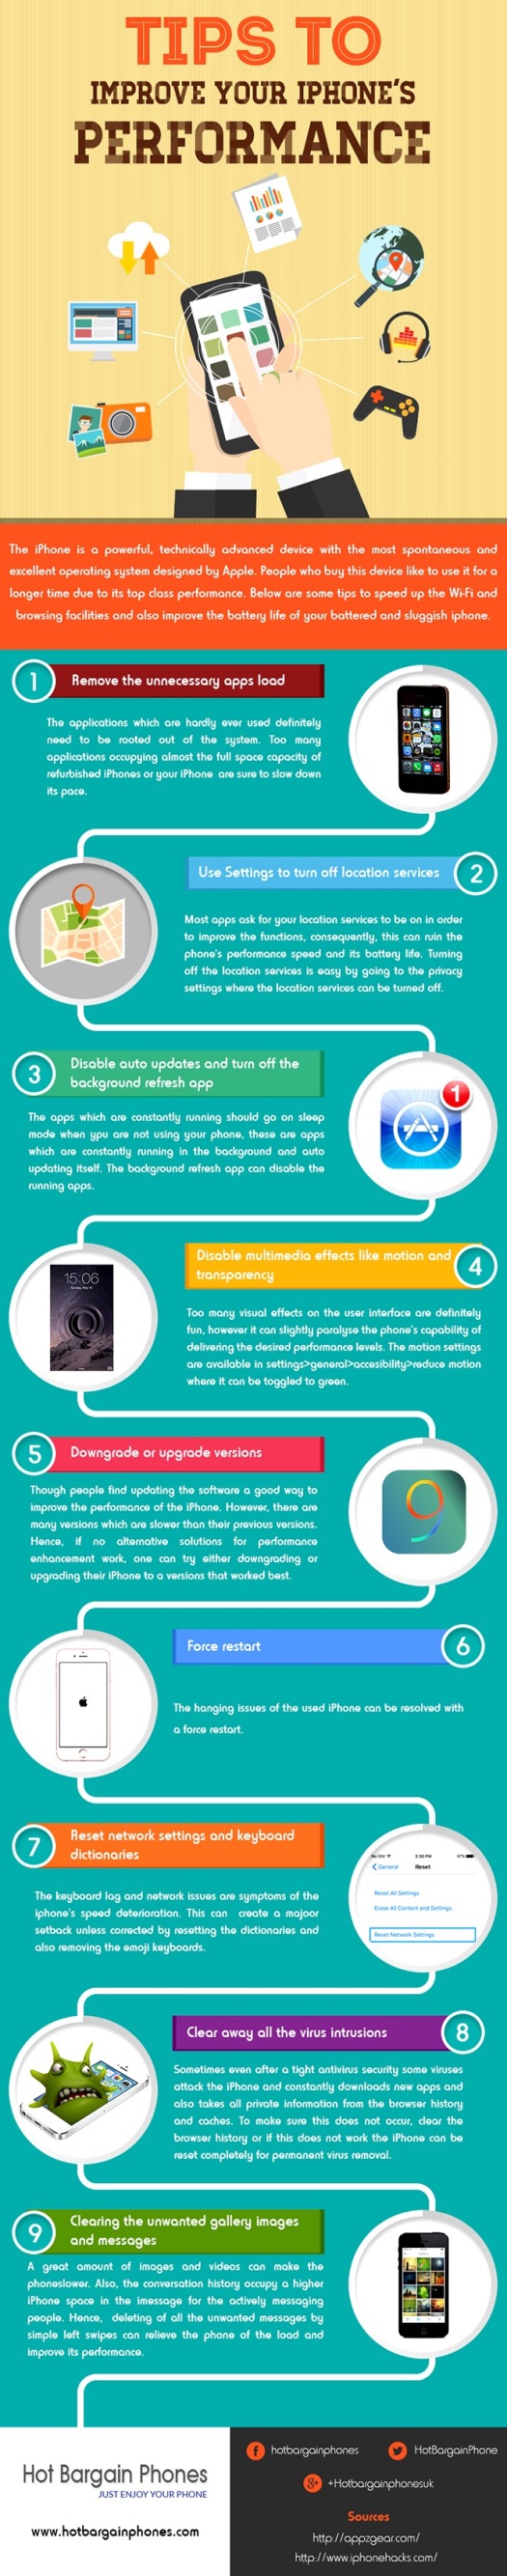 How to improve iPhone speed and performance #infographic